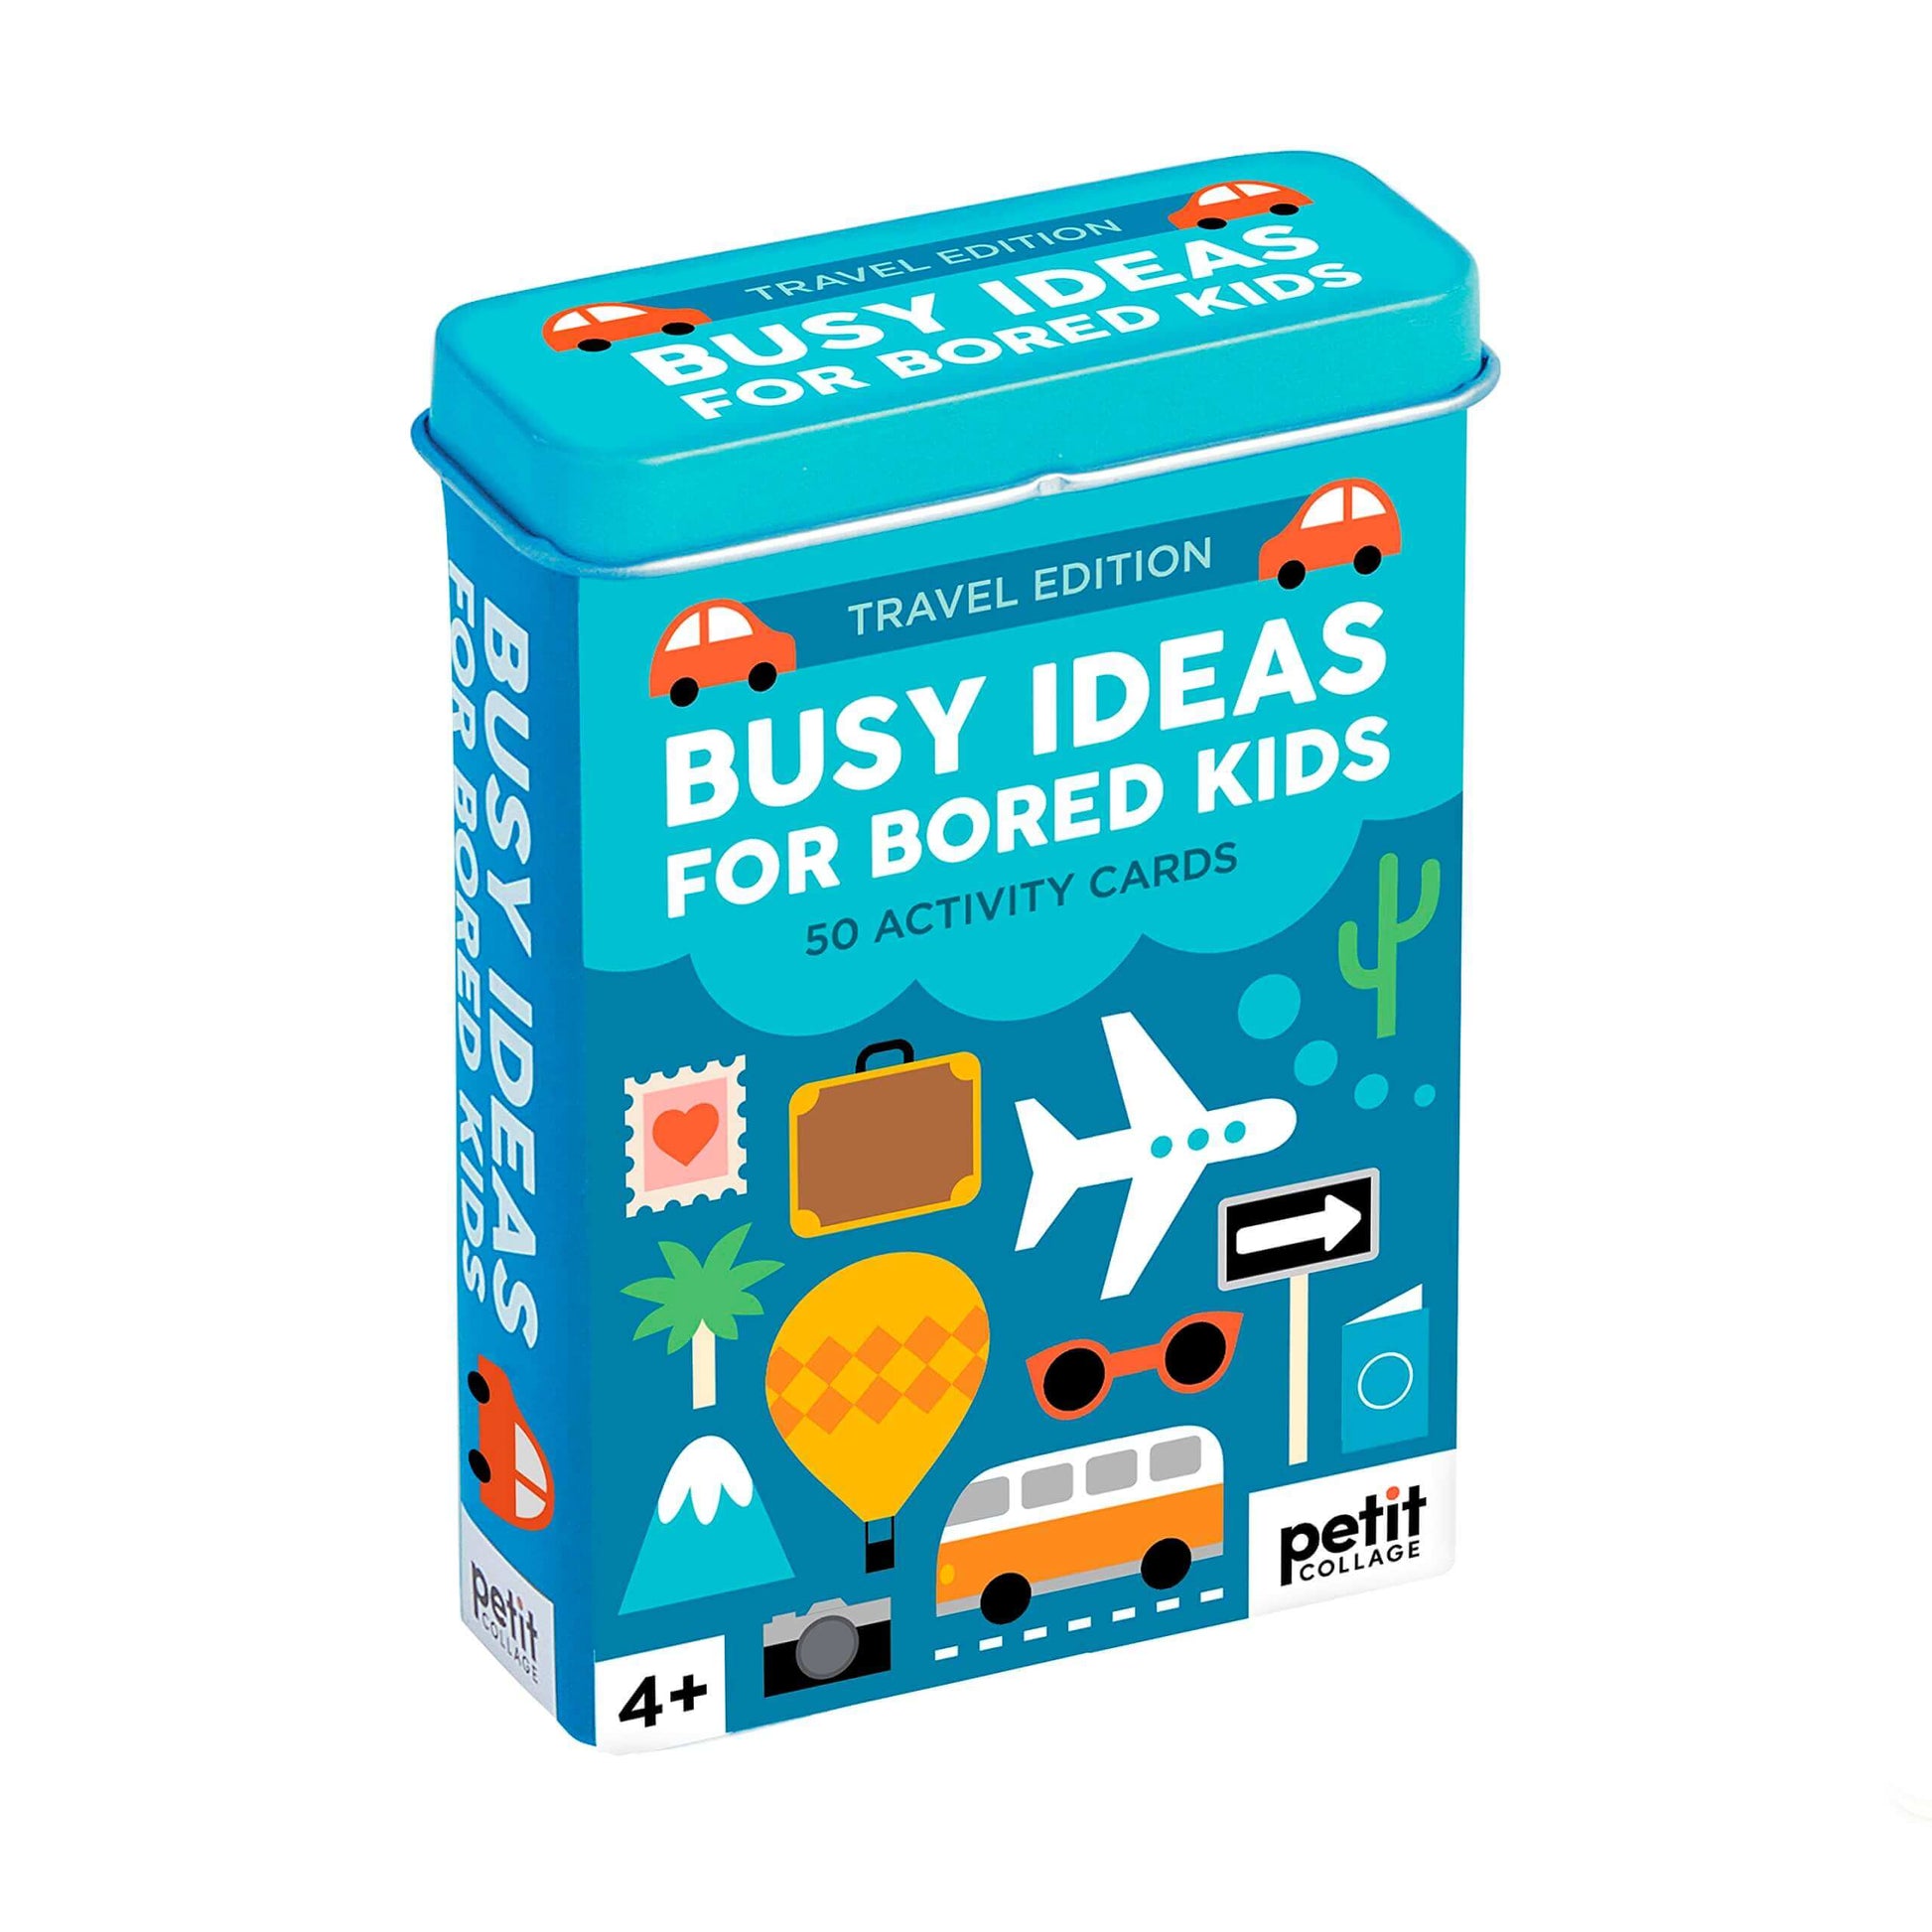 Busy Ideas for Bored Kids Travel Edition, Petit Collage, eco-friendly Toys, Mountain Kids Toys